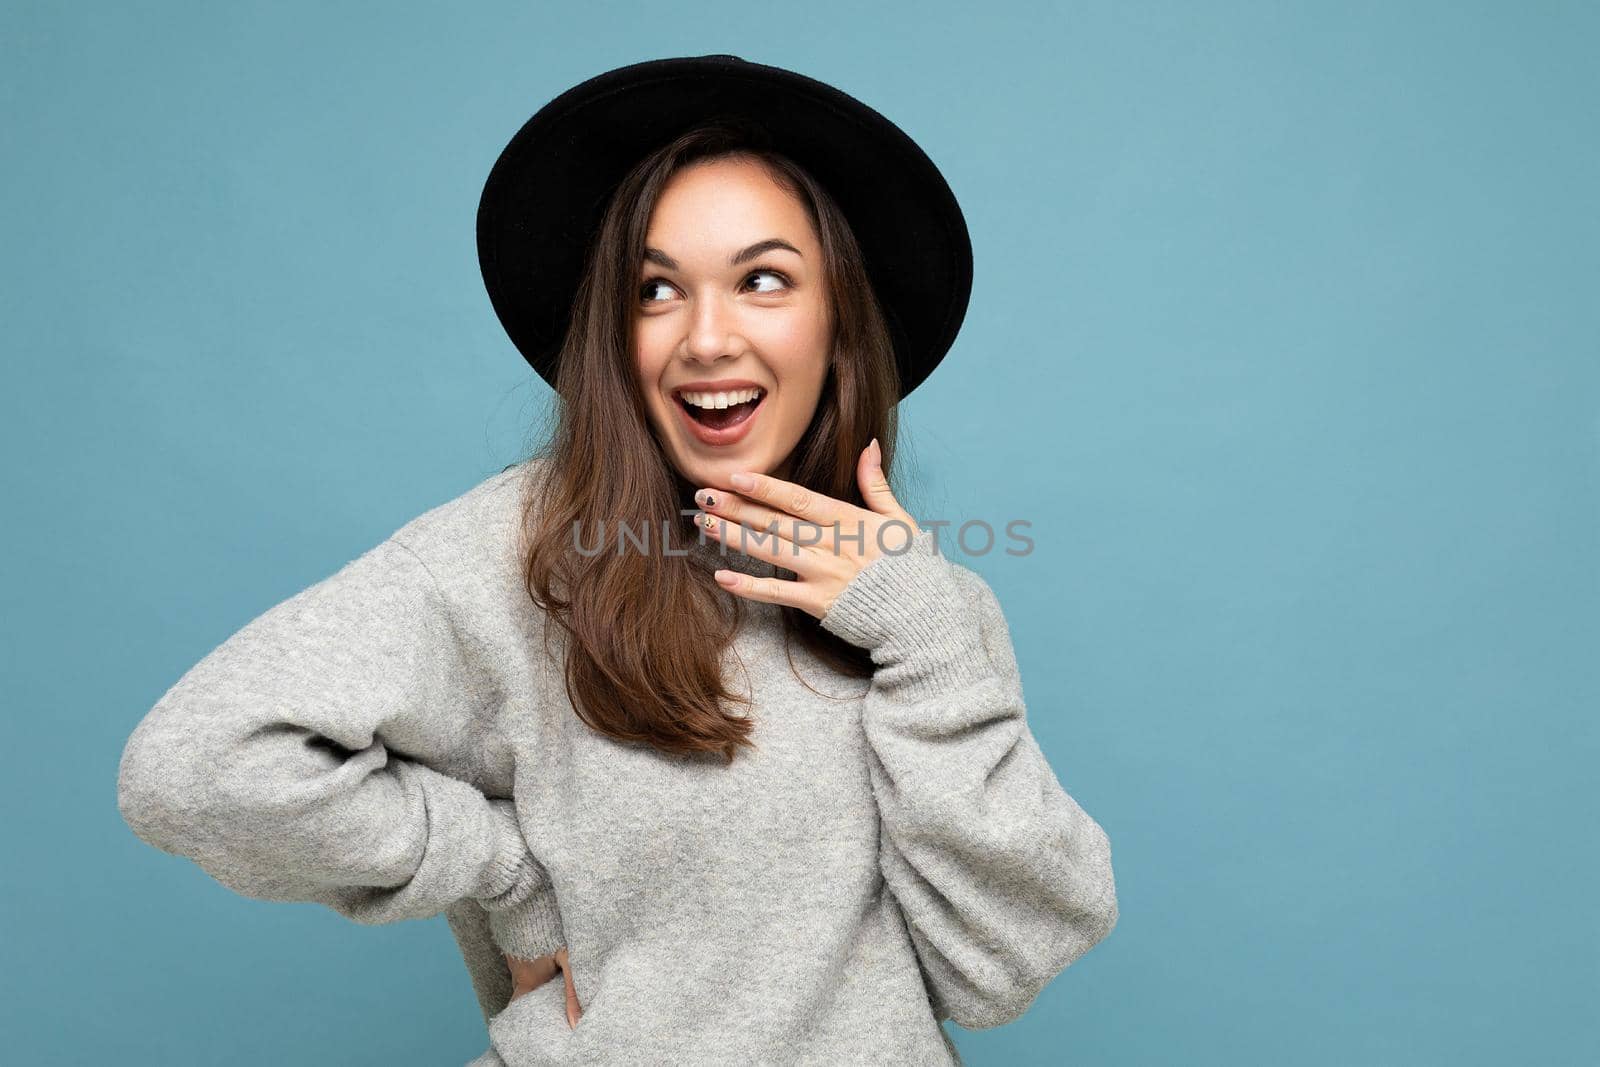 Portrait of young positive happy surprised beautiful brunette woman with sincere emotions wearing stylish grey pullover and black hat isolated over blue background with copy space.